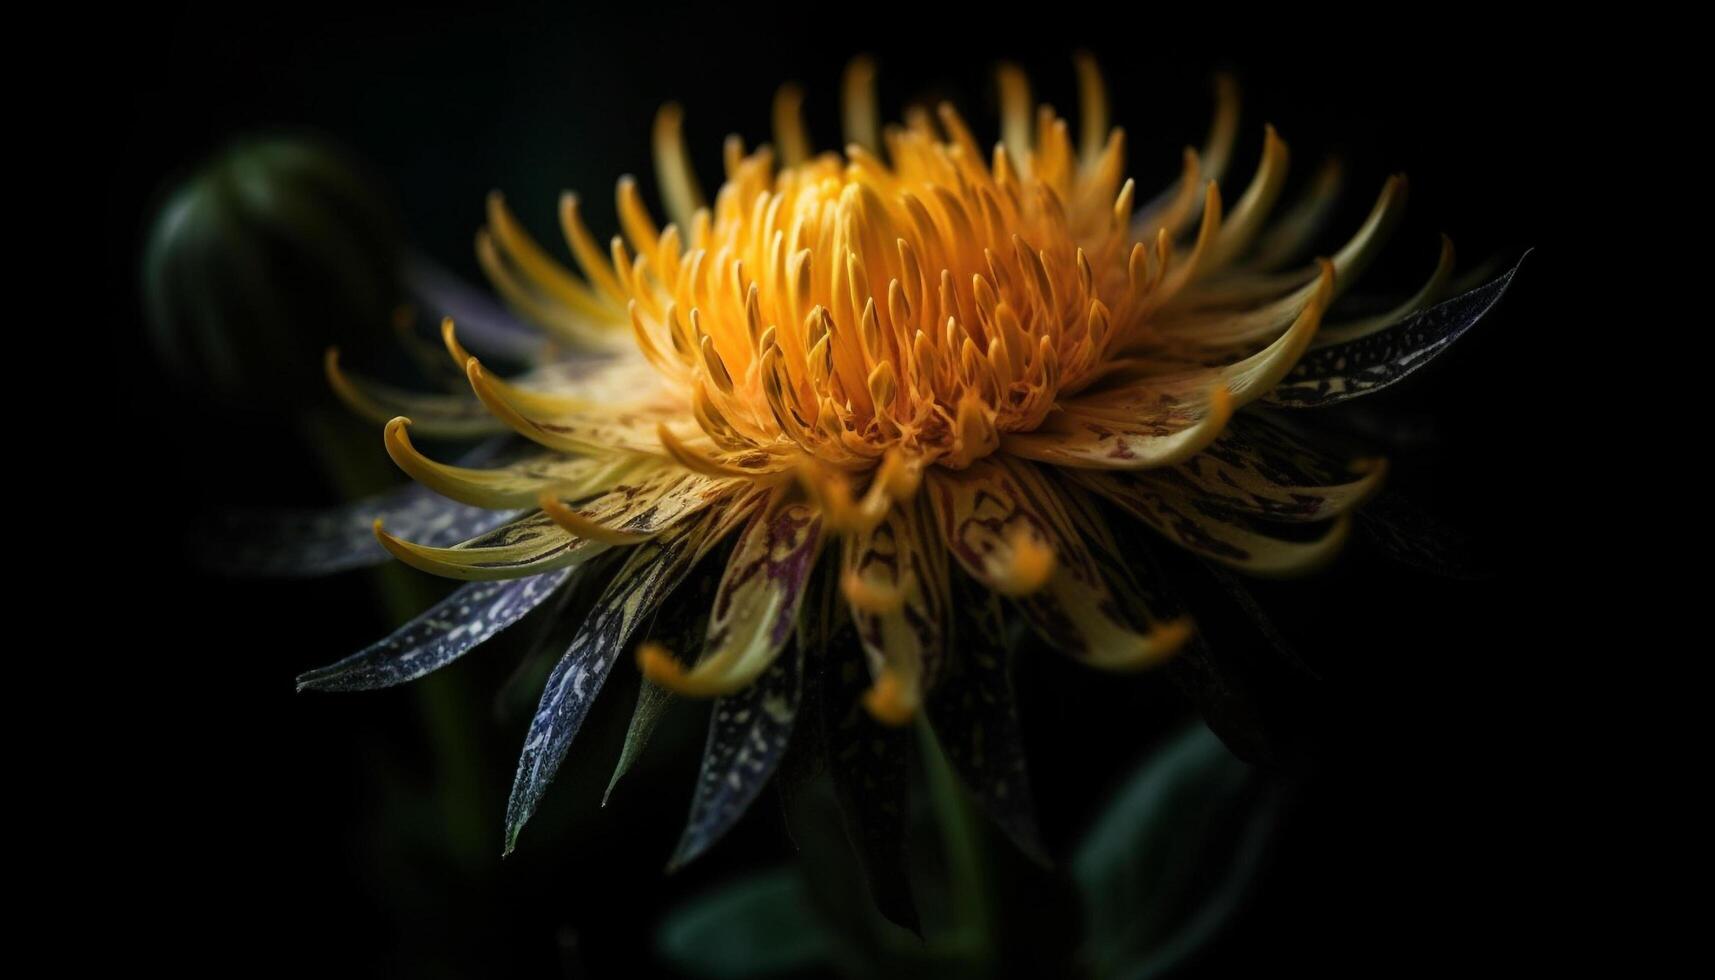 Vibrant colors of a single flower in a black background generated by AI photo